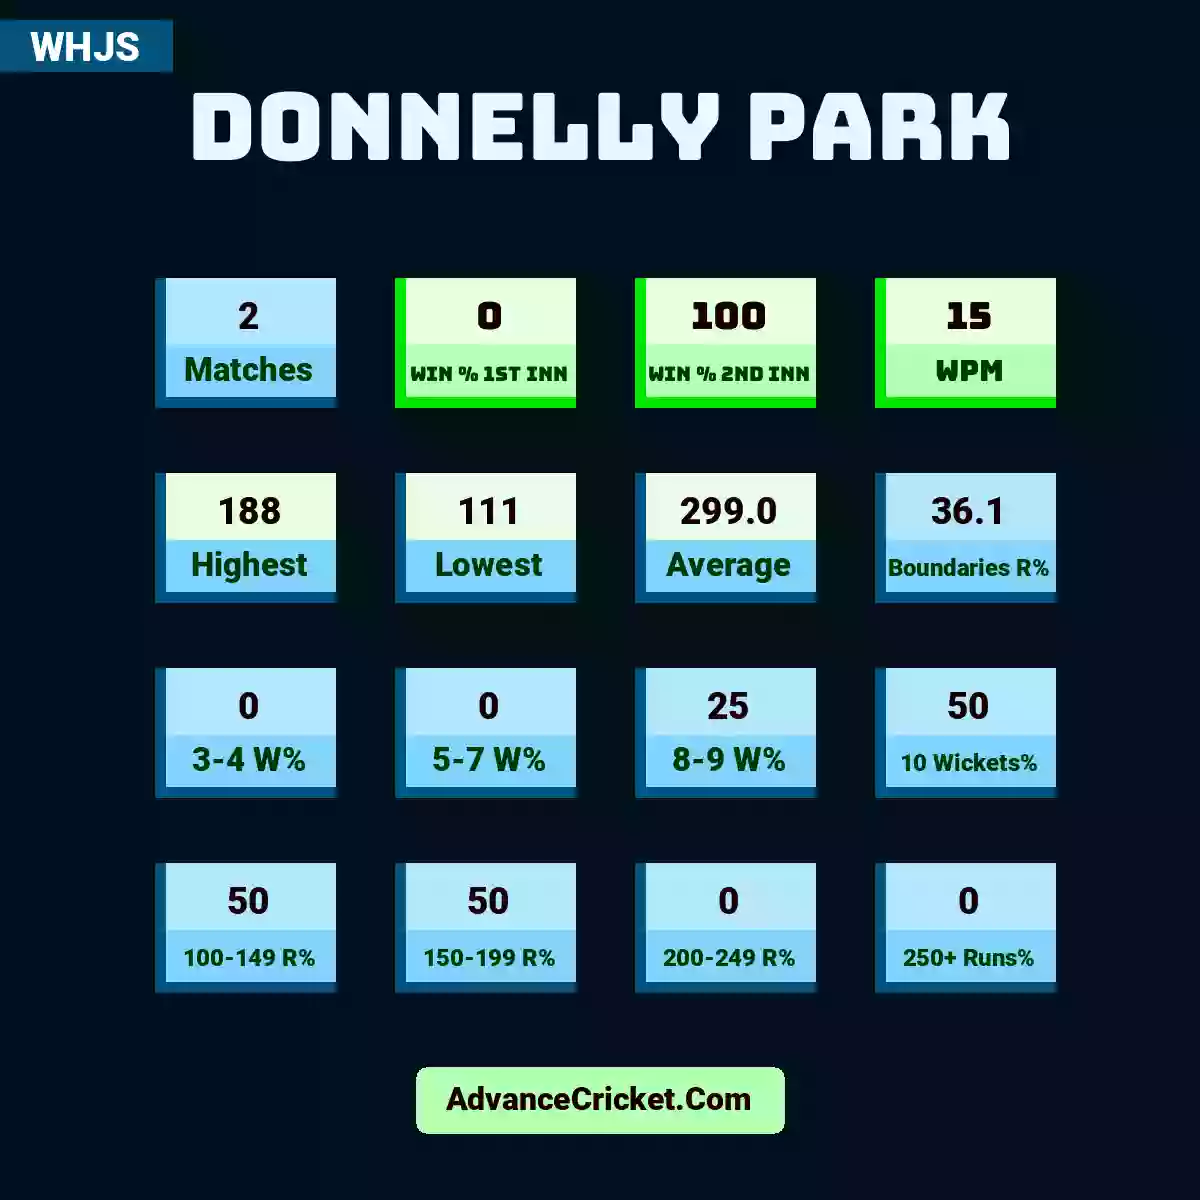 Image showing Donnelly Park with Matches: 2, Win % 1st Inn: 0, Win % 2nd Inn: 100, WPM: 15, Highest: 188, Lowest: 111, Average: 299.0, Boundaries R%: 36.1, 3-4 W%: 0, 5-7 W%: 0, 8-9 W%: 25, 10 Wickets%: 50, 100-149 R%: 50, 150-199 R%: 50, 200-249 R%: 0, 250+ Runs%: 0.